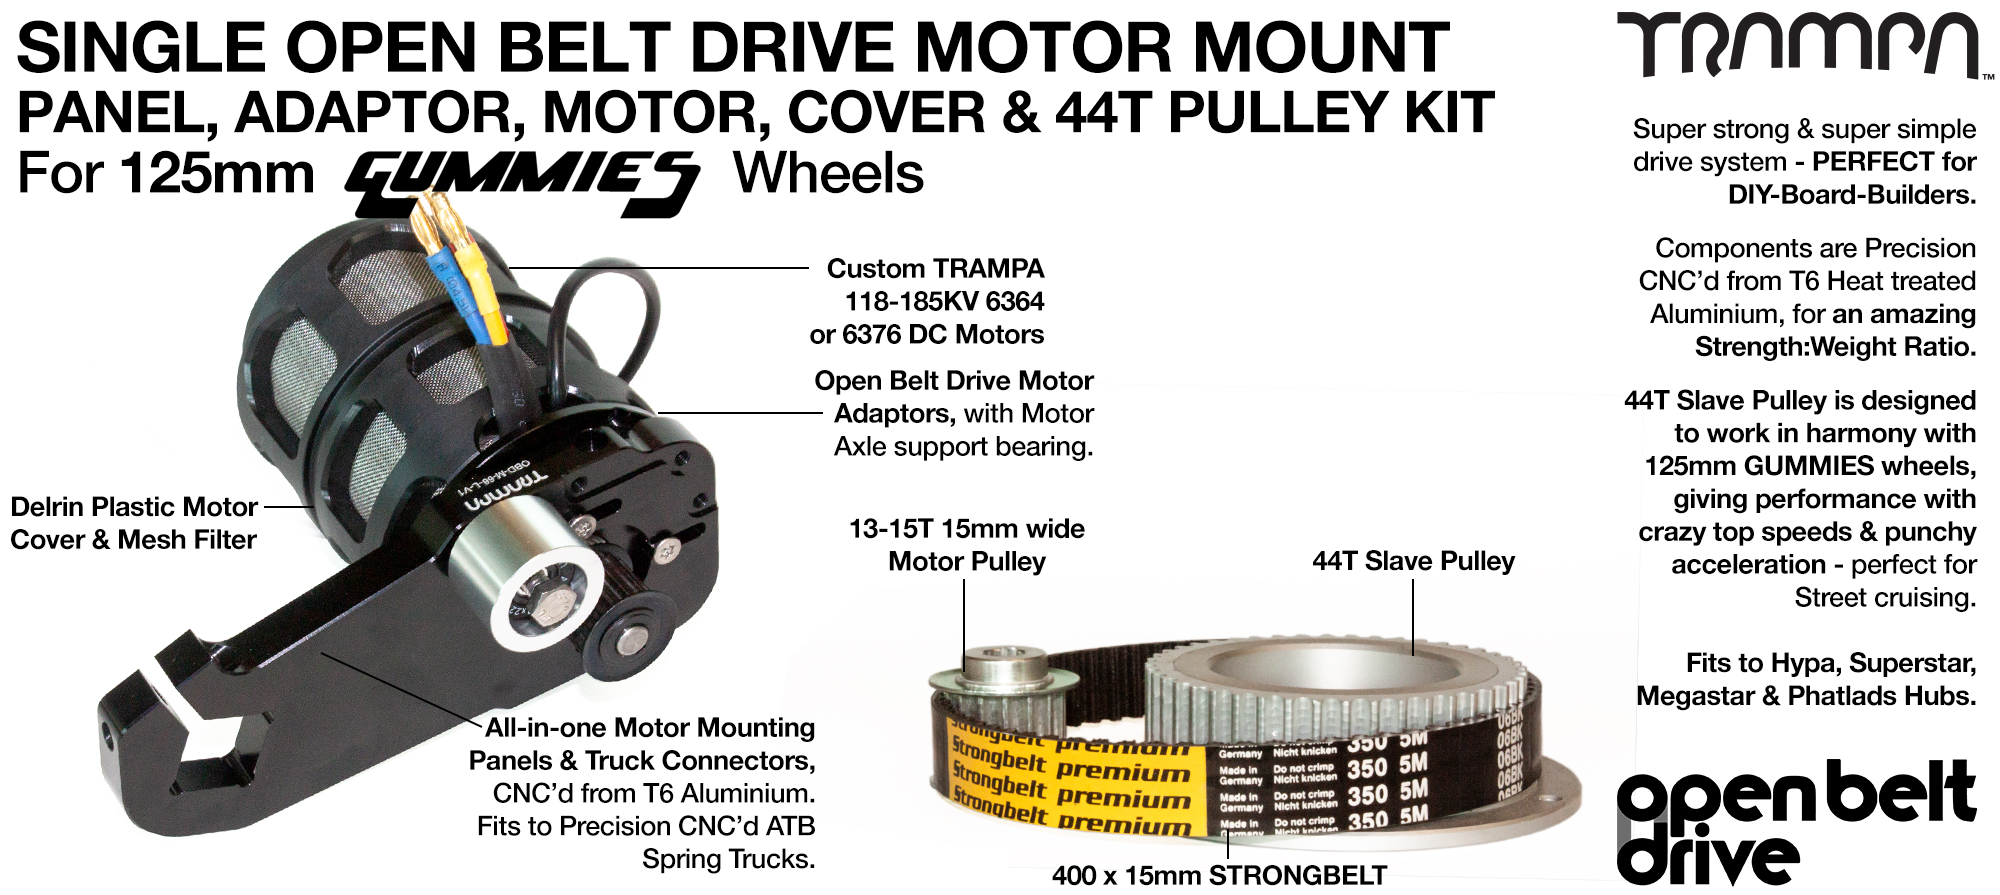 66T OBD Motor Mount with 44T Pulley kit, Motor & Filters  - SINGLE